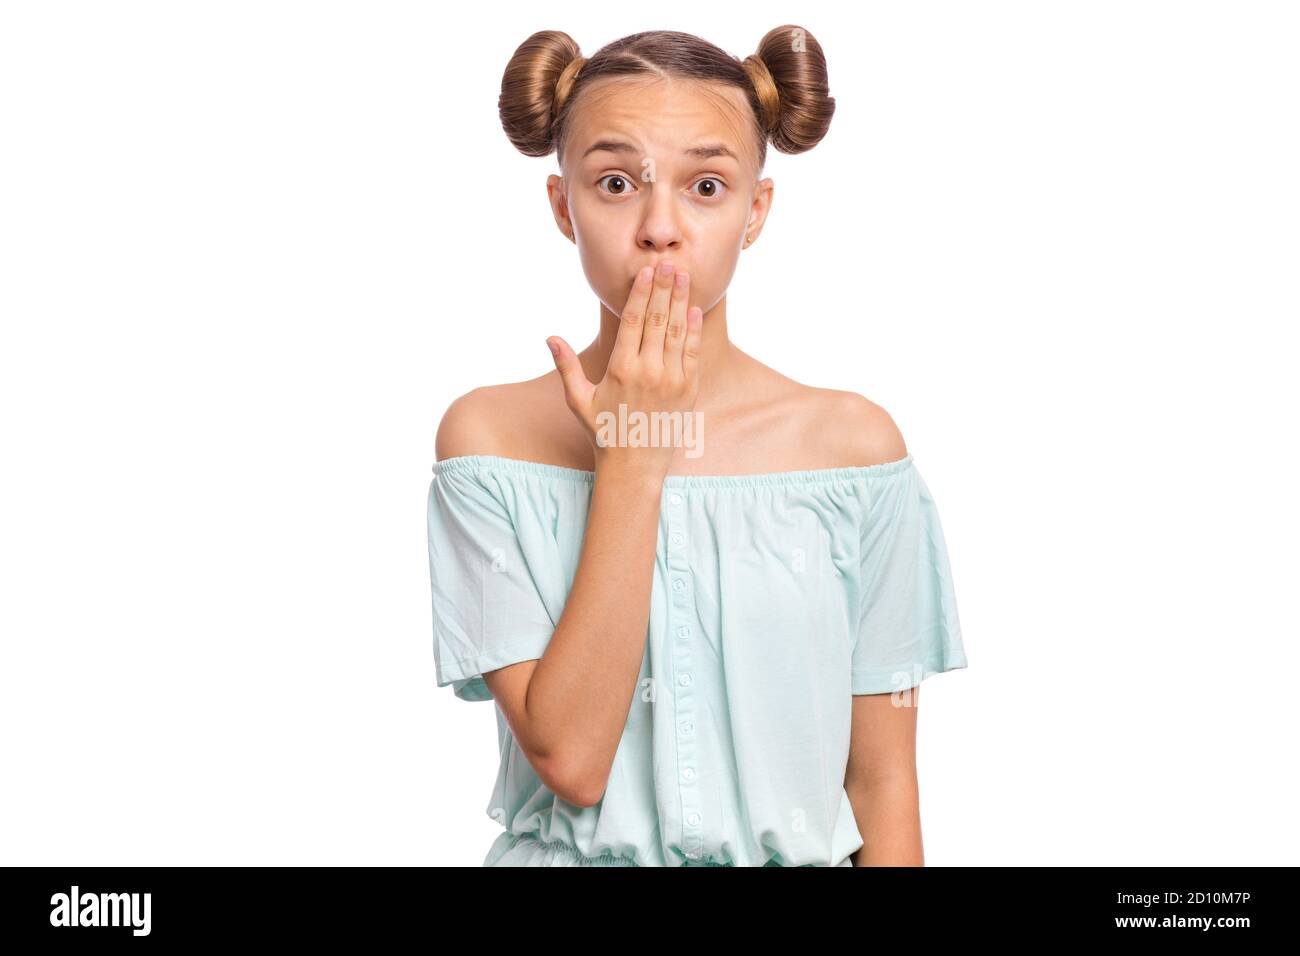 Girl emotions and signs Stock Photo